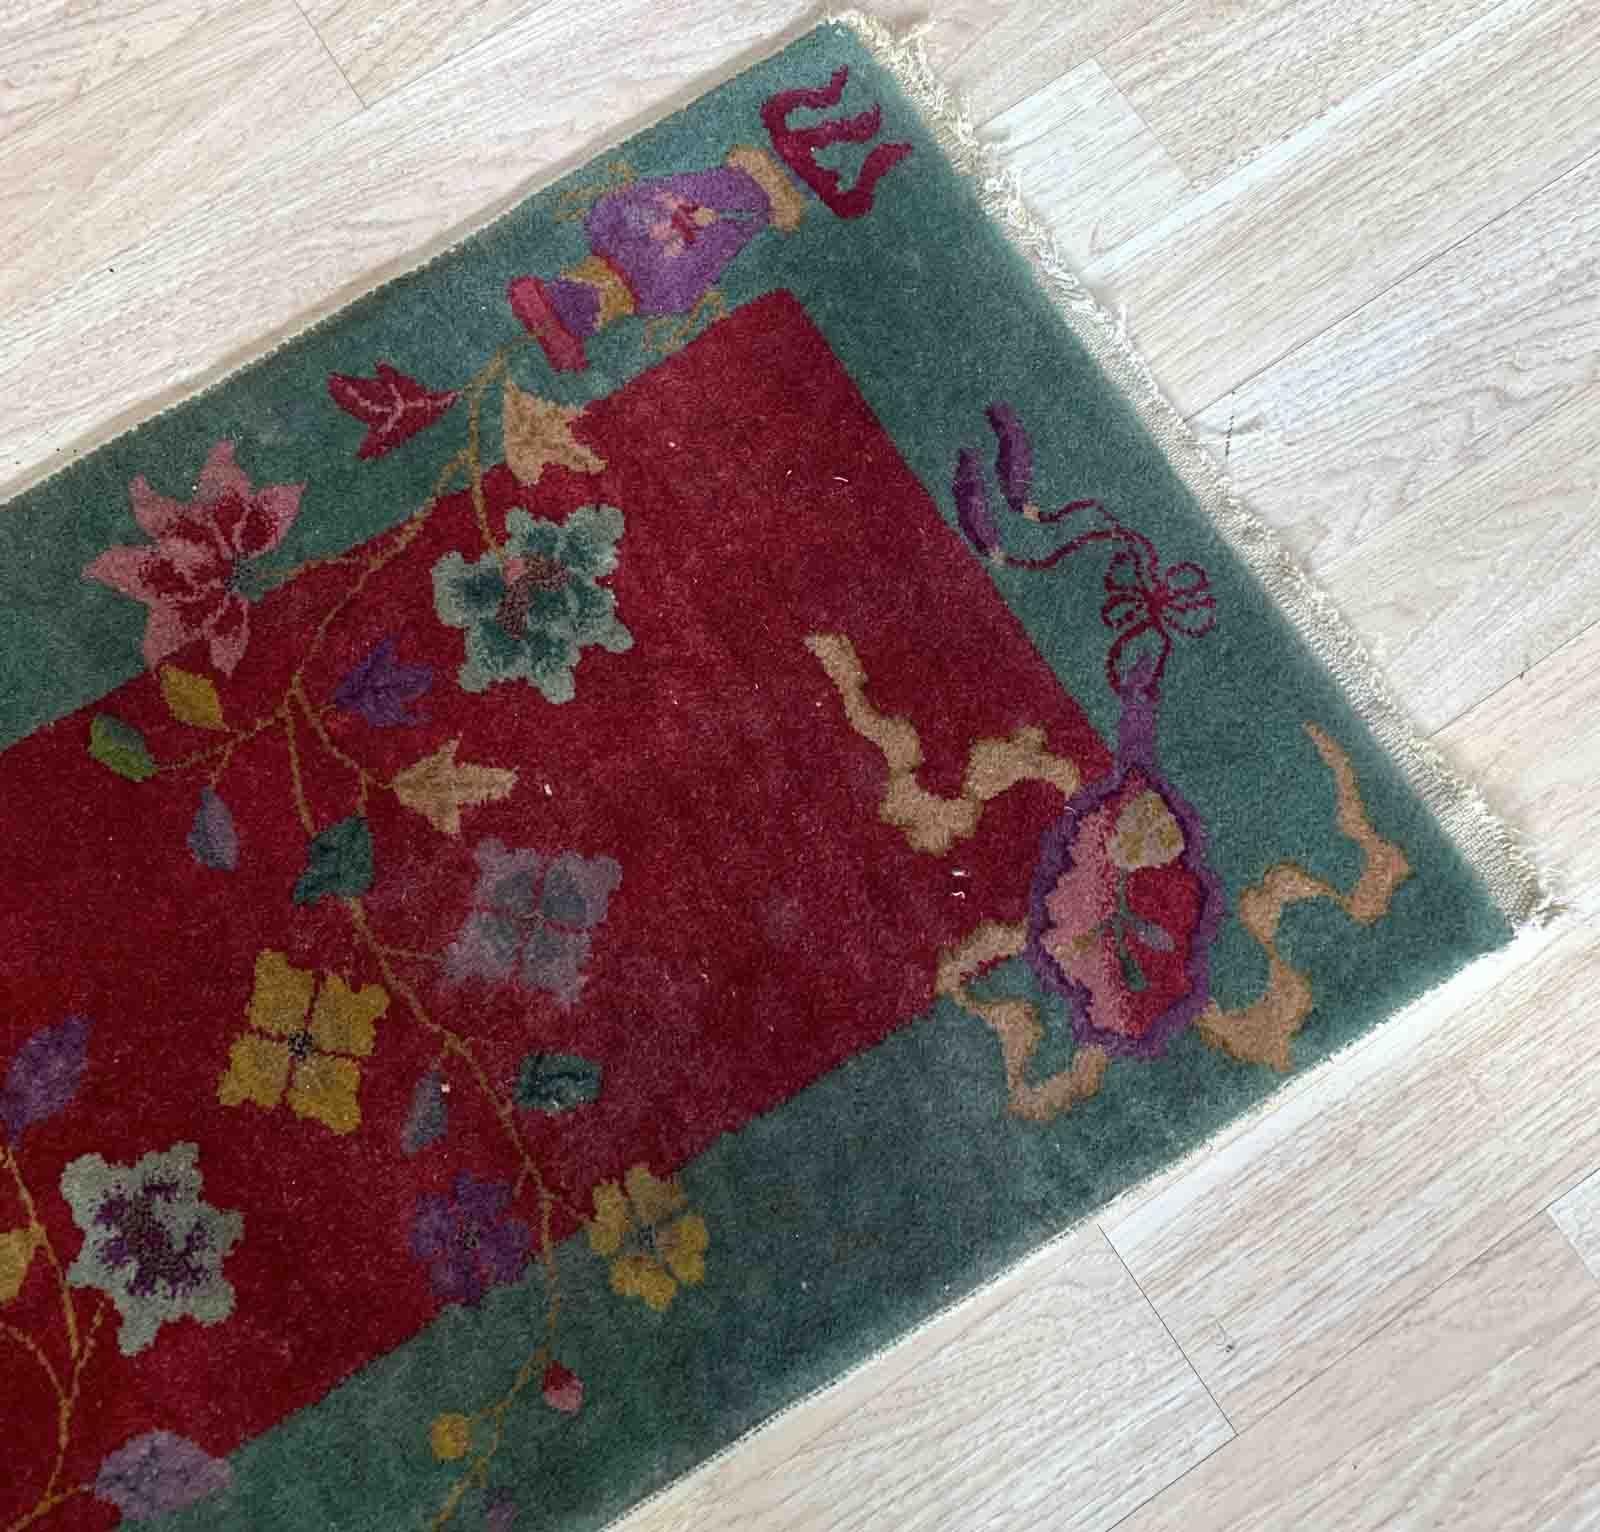 This exquisite Art Deco Chinese rug from the 1920s is a true work of art. Handmade with meticulous attention to detail, it features a captivating design in rich, vibrant colors. The background colors of deep red, grass green, purple, beige, and